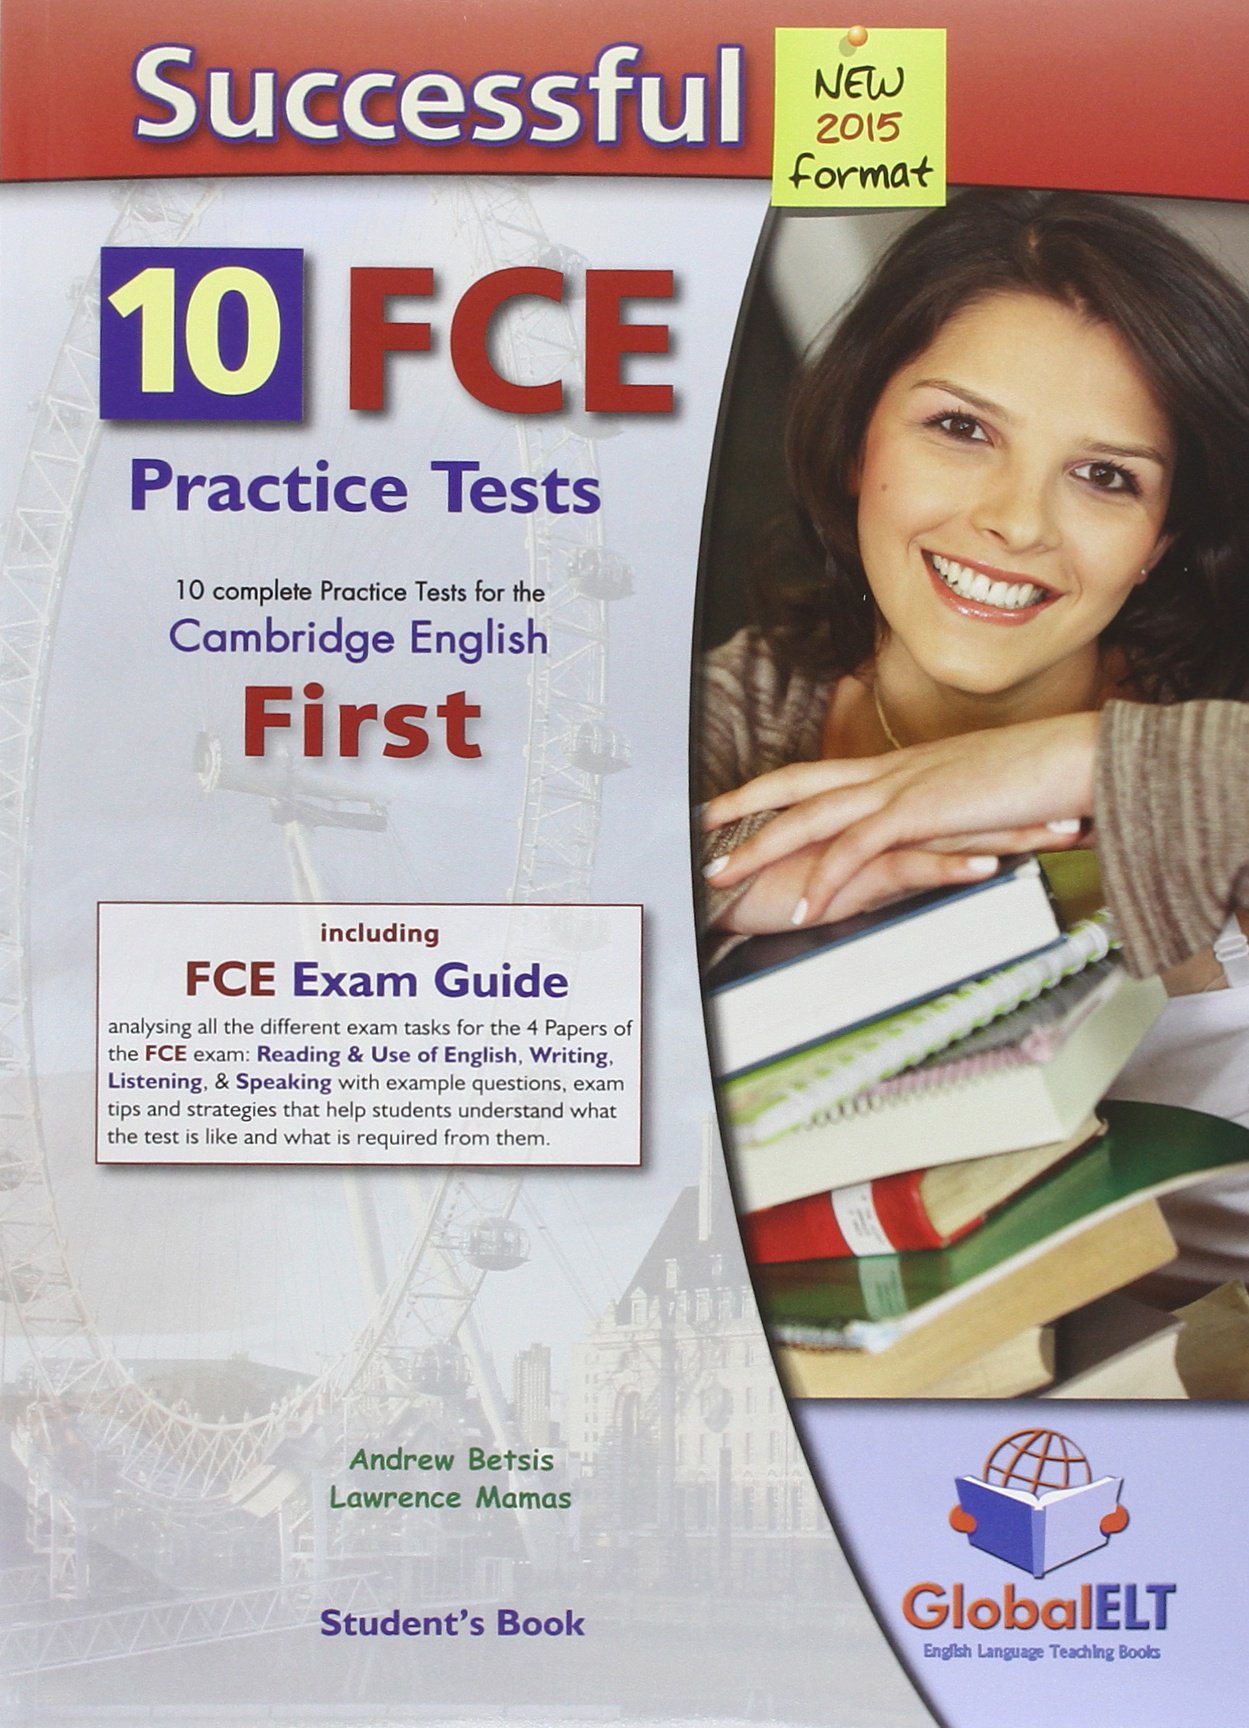 Successful FCE - 10 Practice Tests - Self-Study Edition with CD | Andrew Betsis, Lawrence Mamas